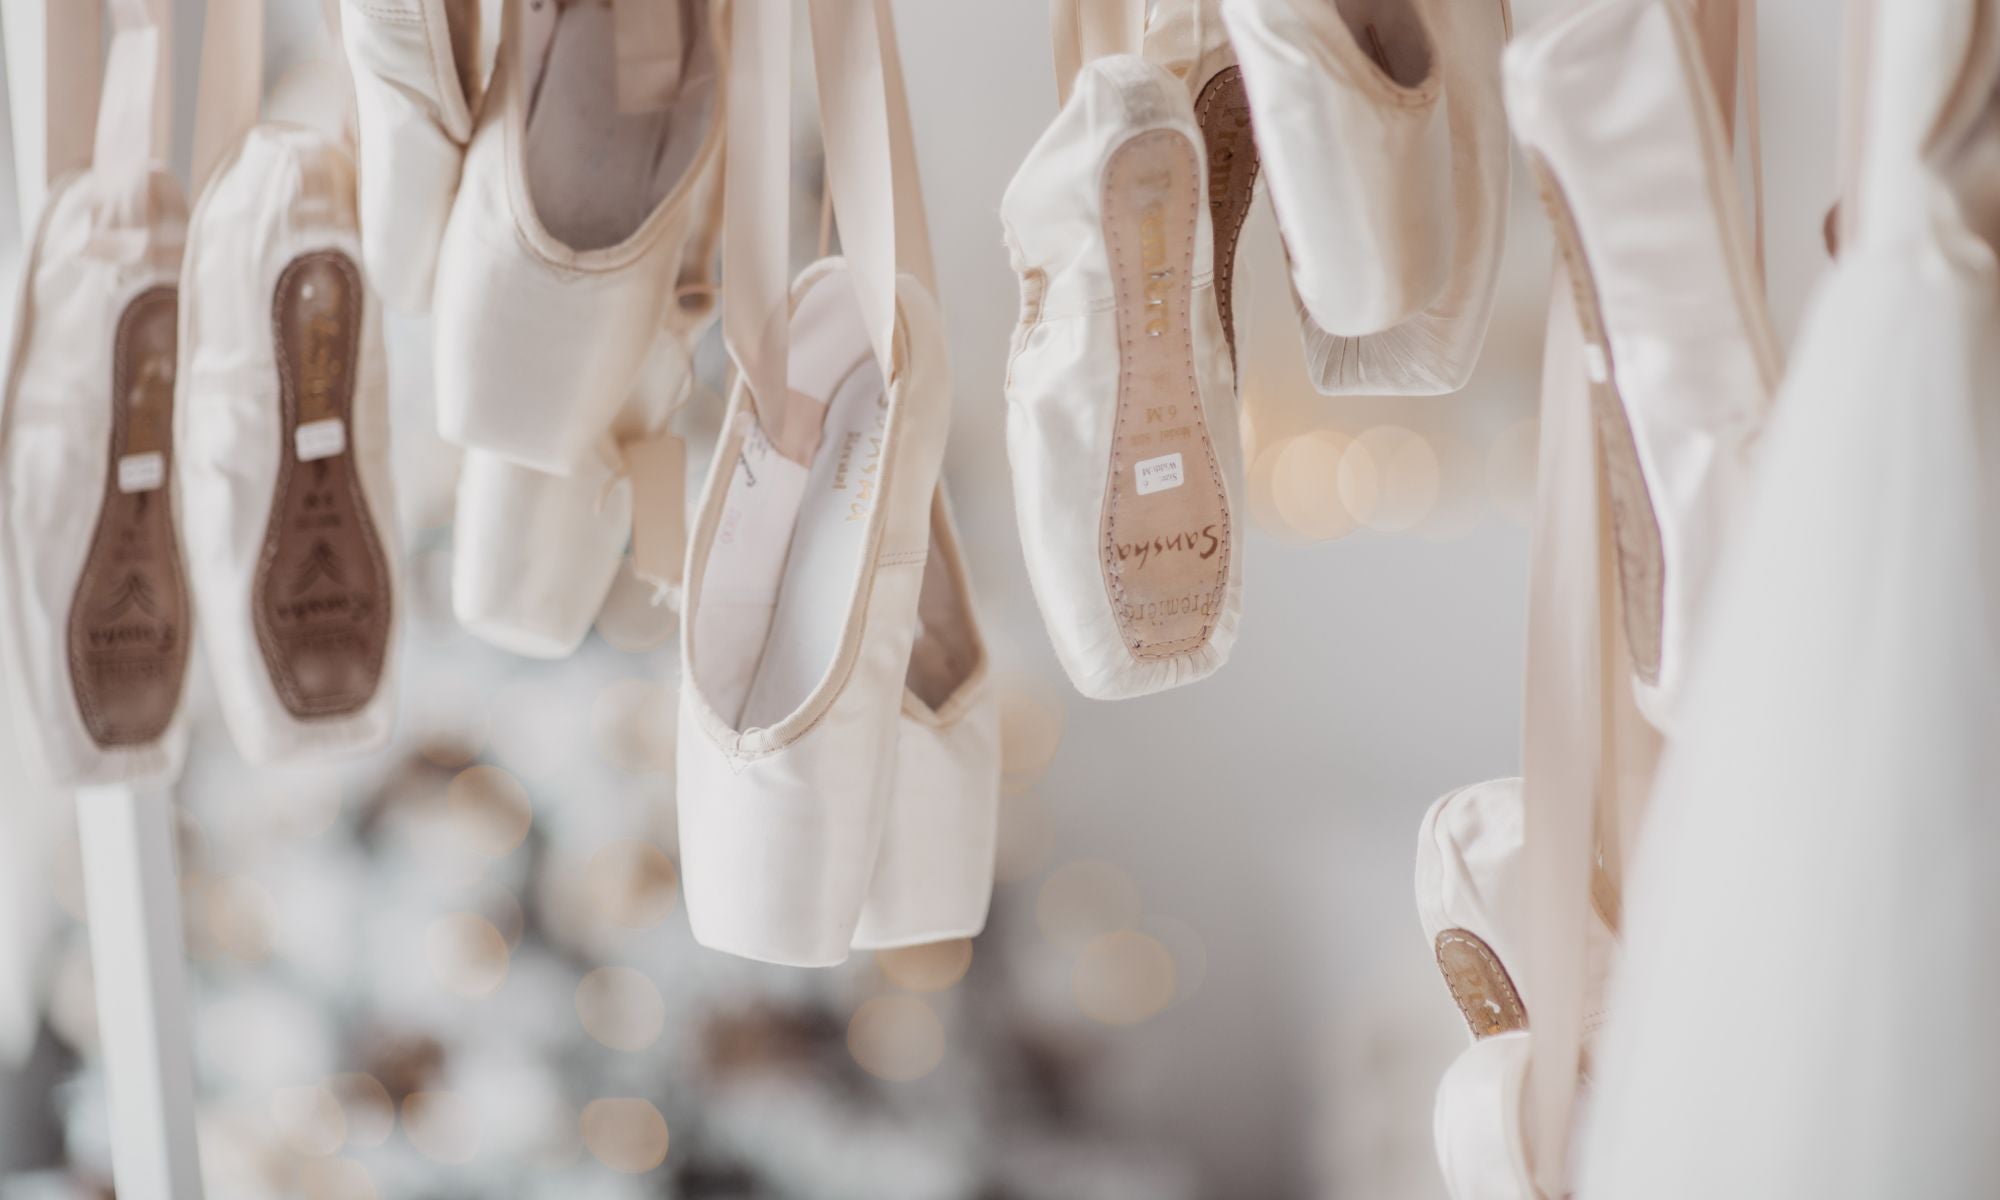 Professional Pointe Shoe Fittings, Ballet Leotards And Dance Shoes – Studio  Dance Wear